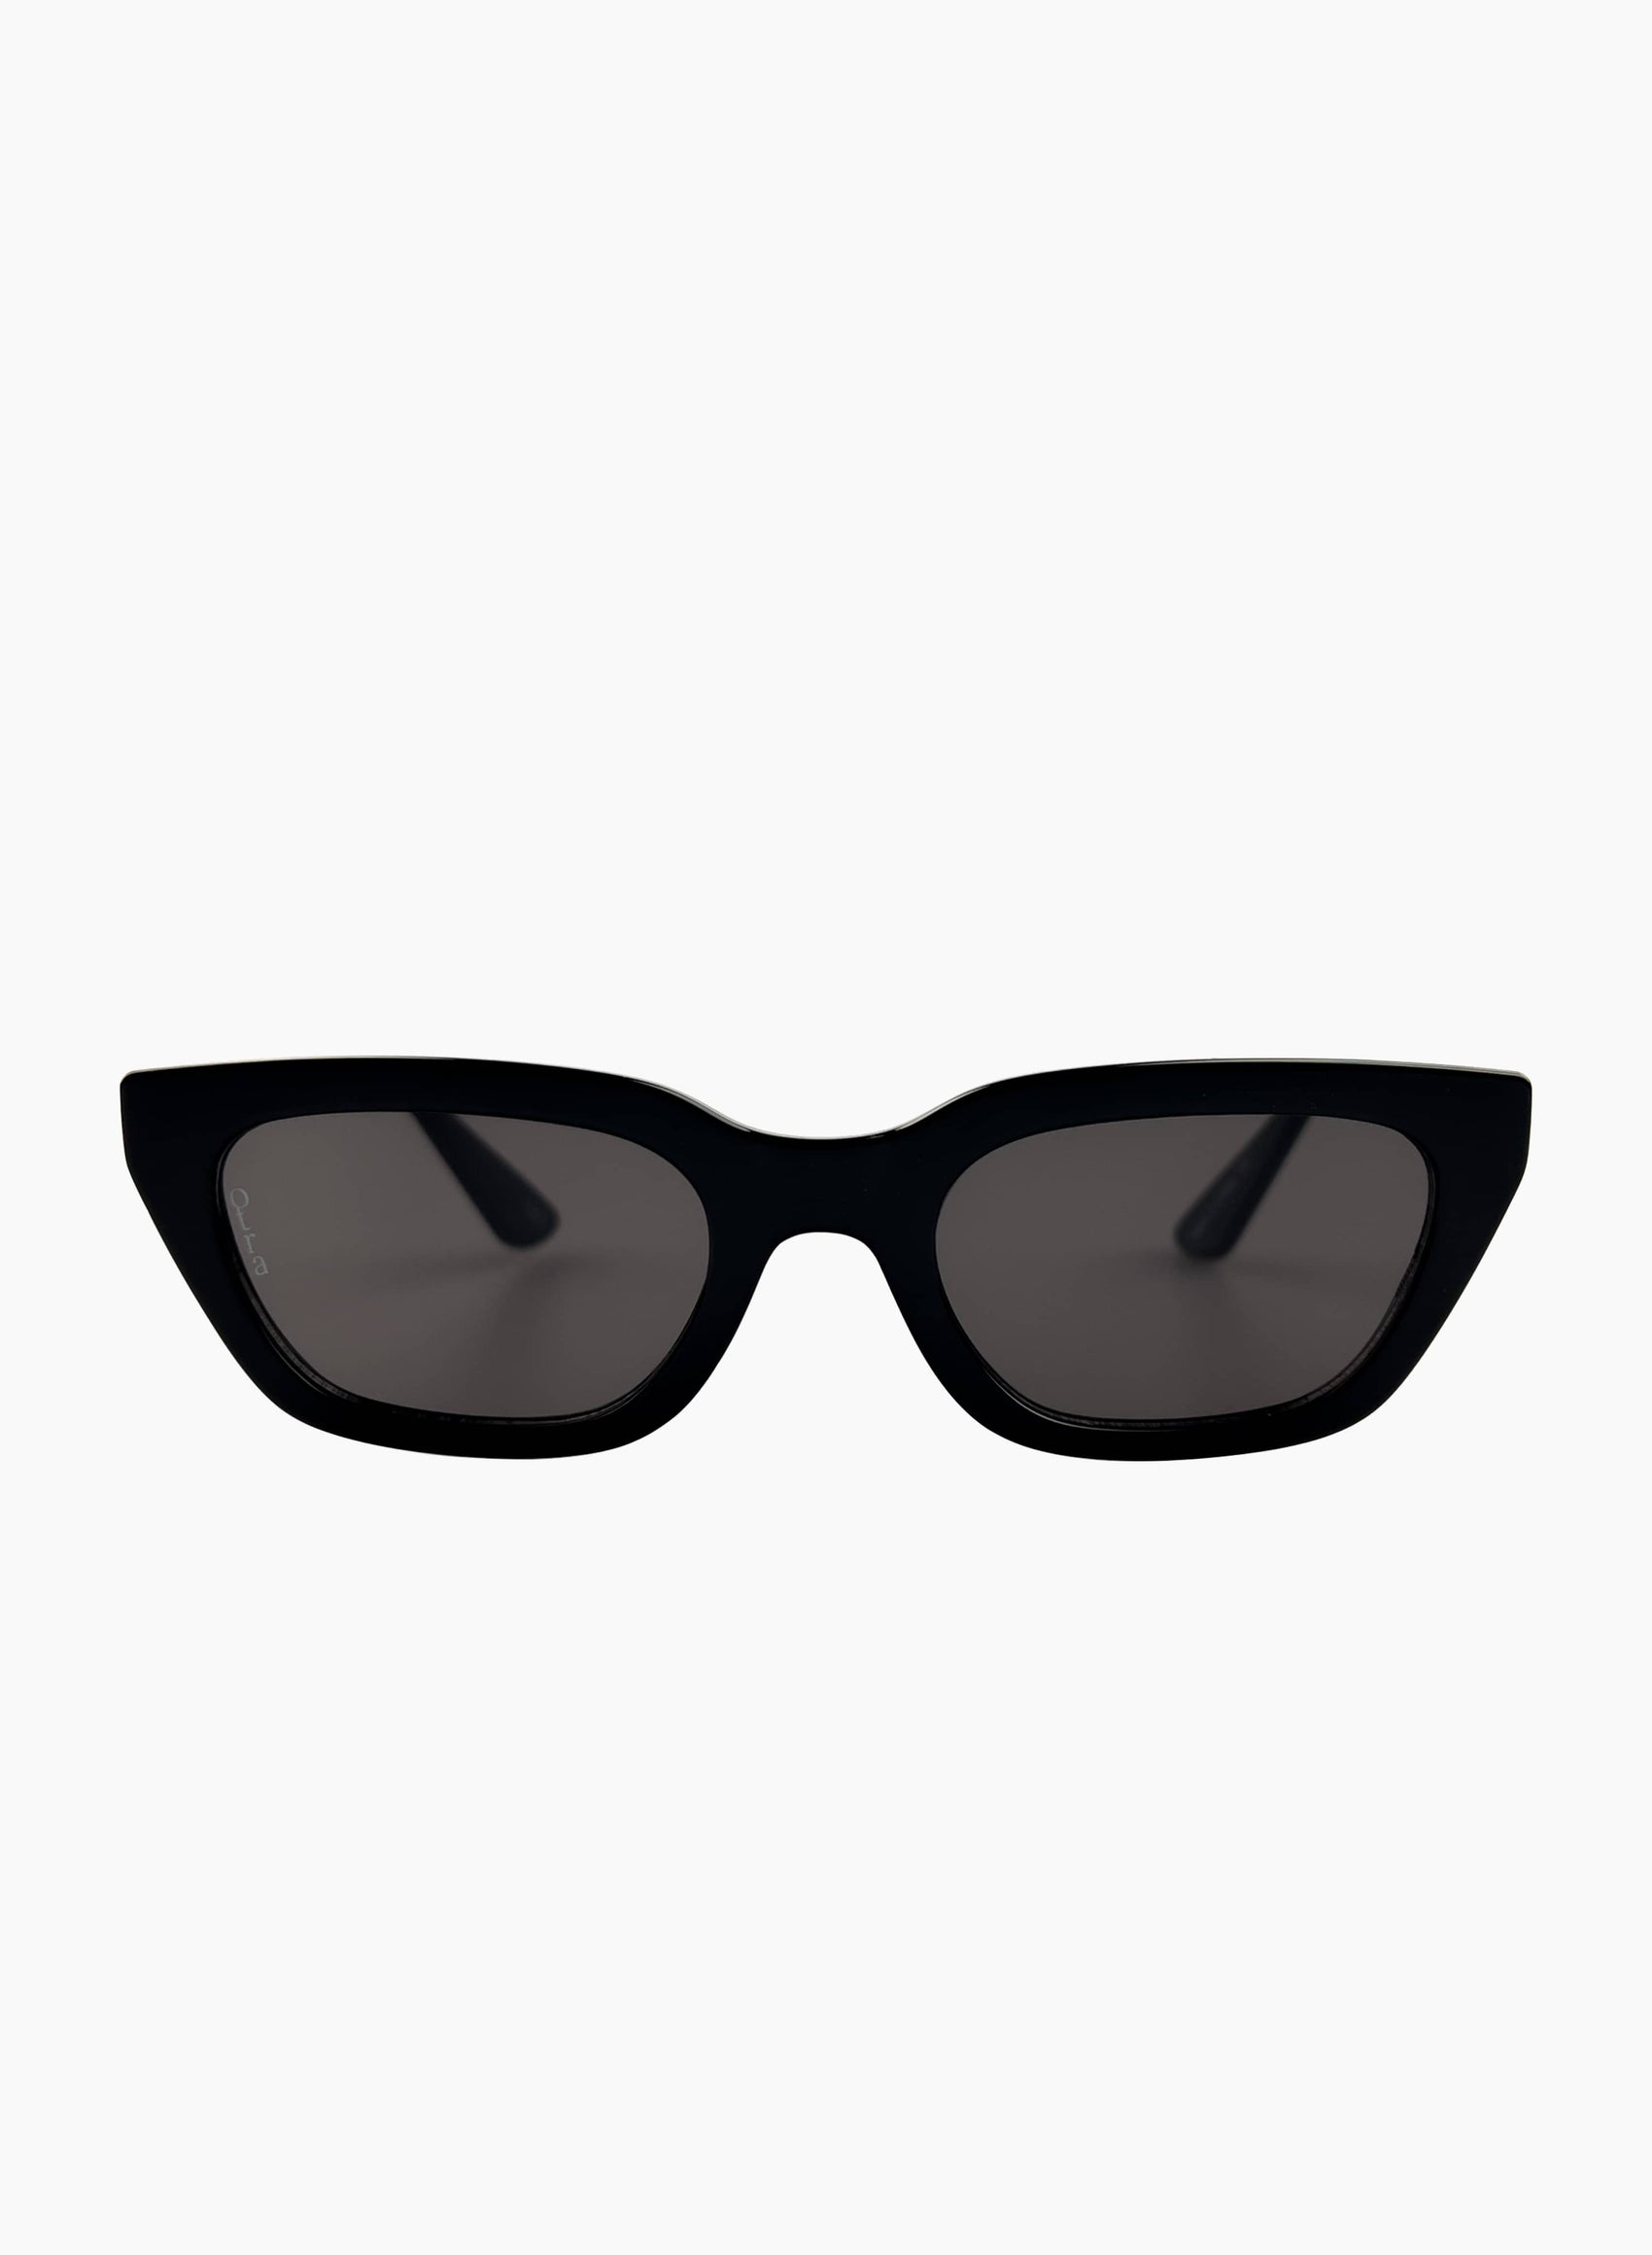 Nove sunglasses featuring a black cat eye frame and black lenses